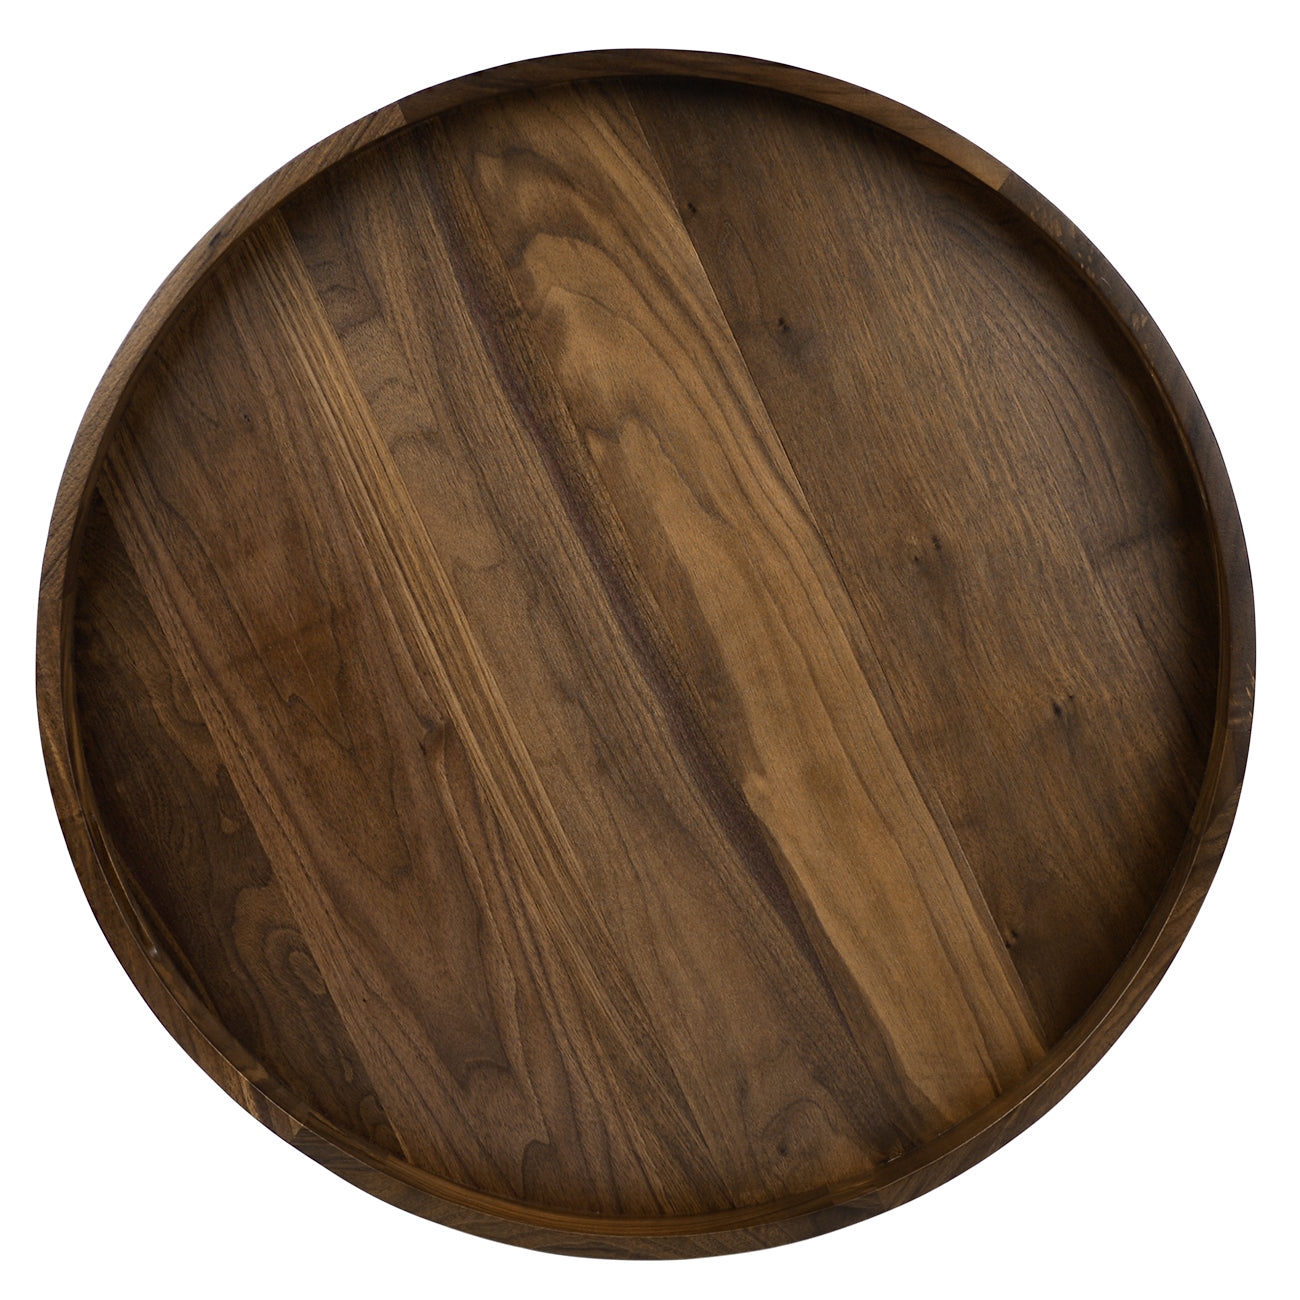 Round Black Walnut Wood Serving Tray Ottoman Tray with Handles - On Sale -  Bed Bath & Beyond - 36811300